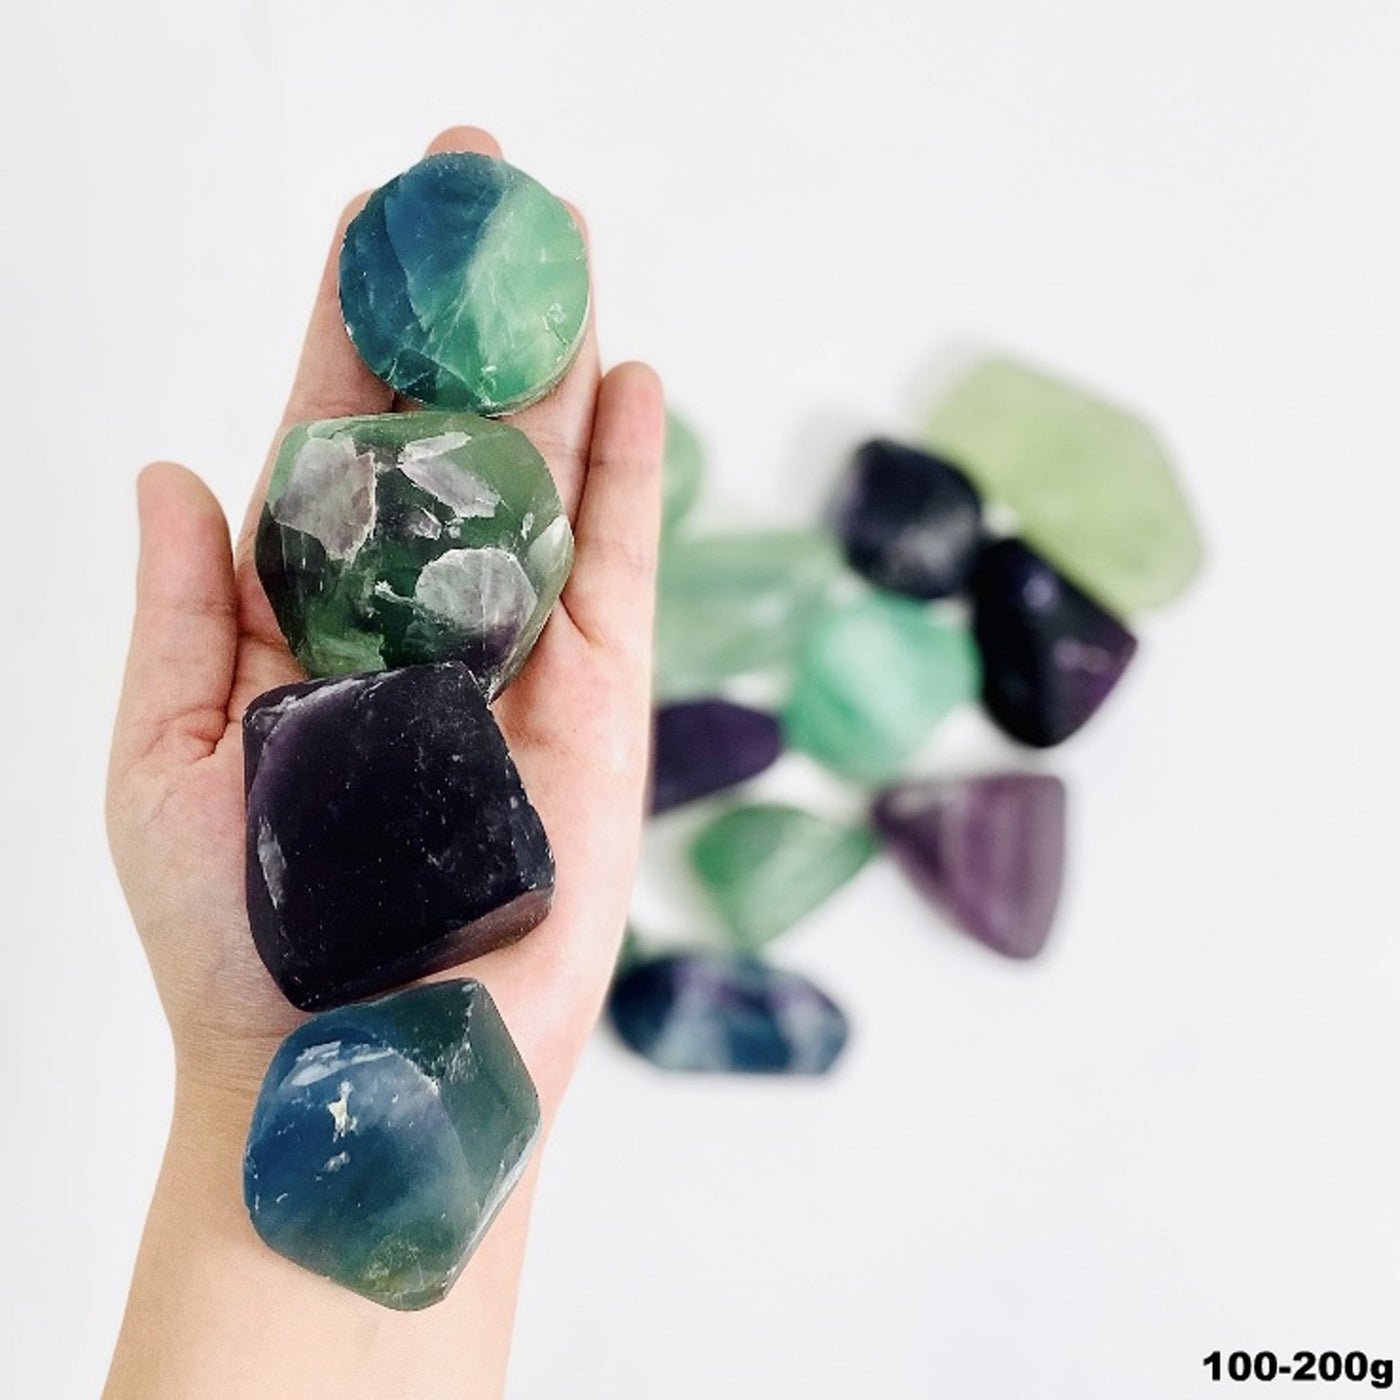 Hand holding up 4 Rainbow Fluorite Tumbled Stones over pile of stones blurred over white background